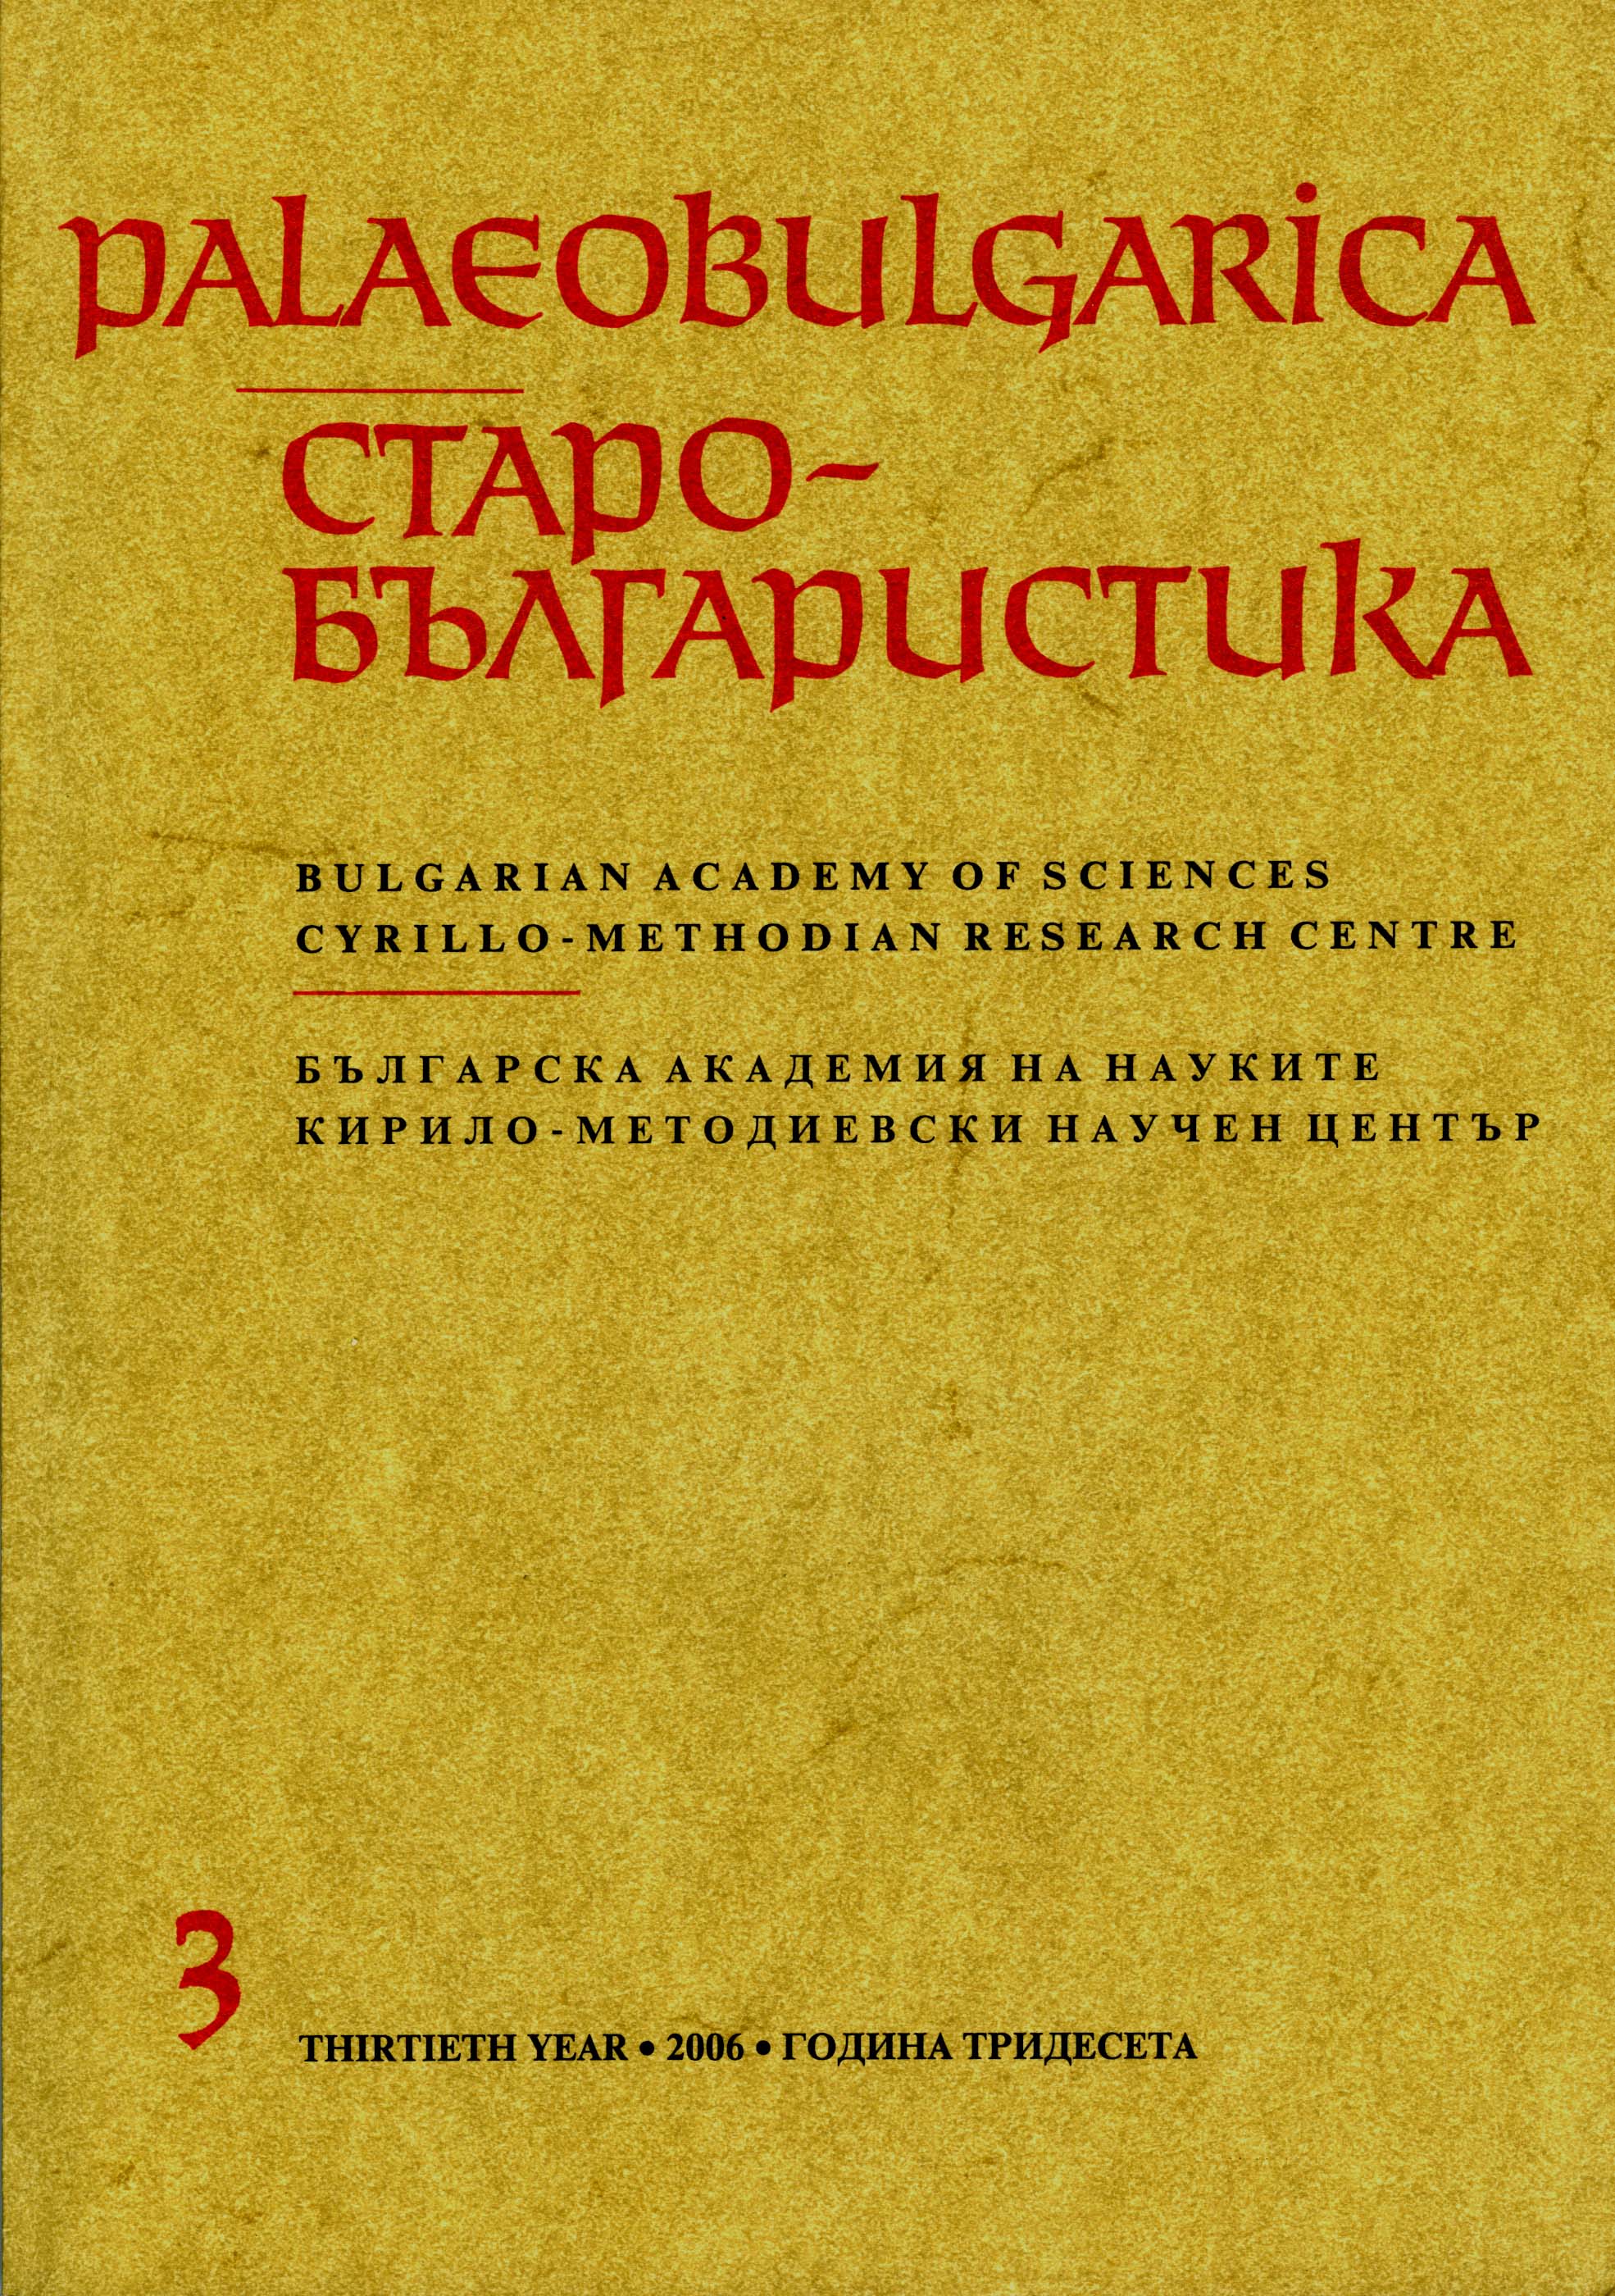 Textual Observations on the Church Slavonic Gospel in B. Tjapinsky's Belarusian Protestant Edition from the Second Half of the 16th Century Cover Image